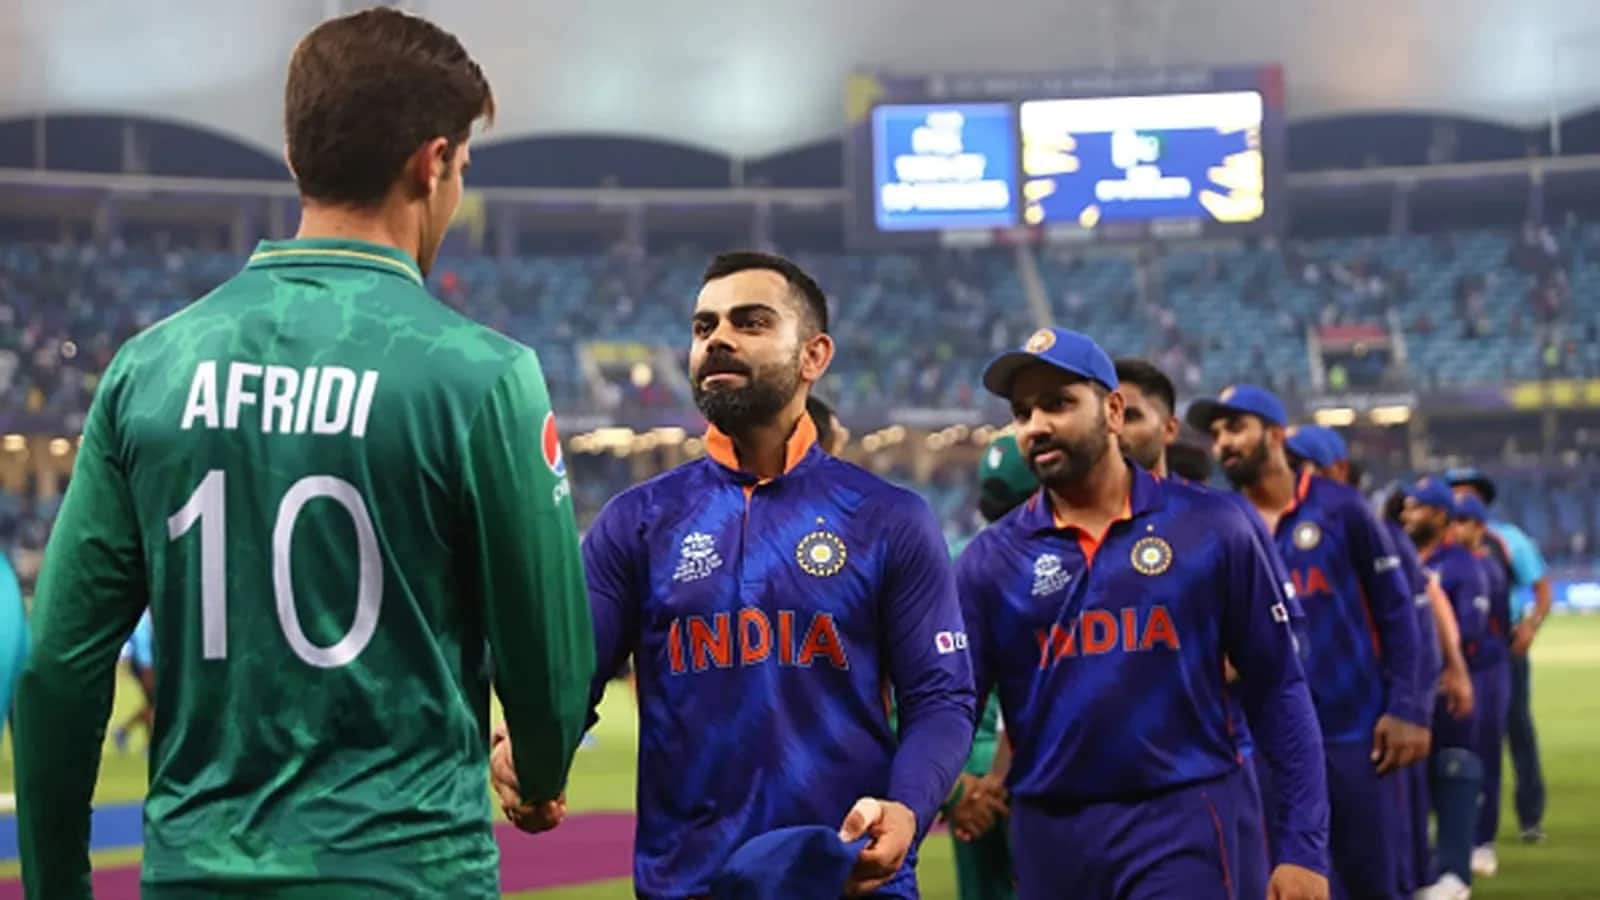 'We Should Stop Thinking And Concentrating...' Shaheen Afridi Makes Huge Claims Over IND vs PAK Clash